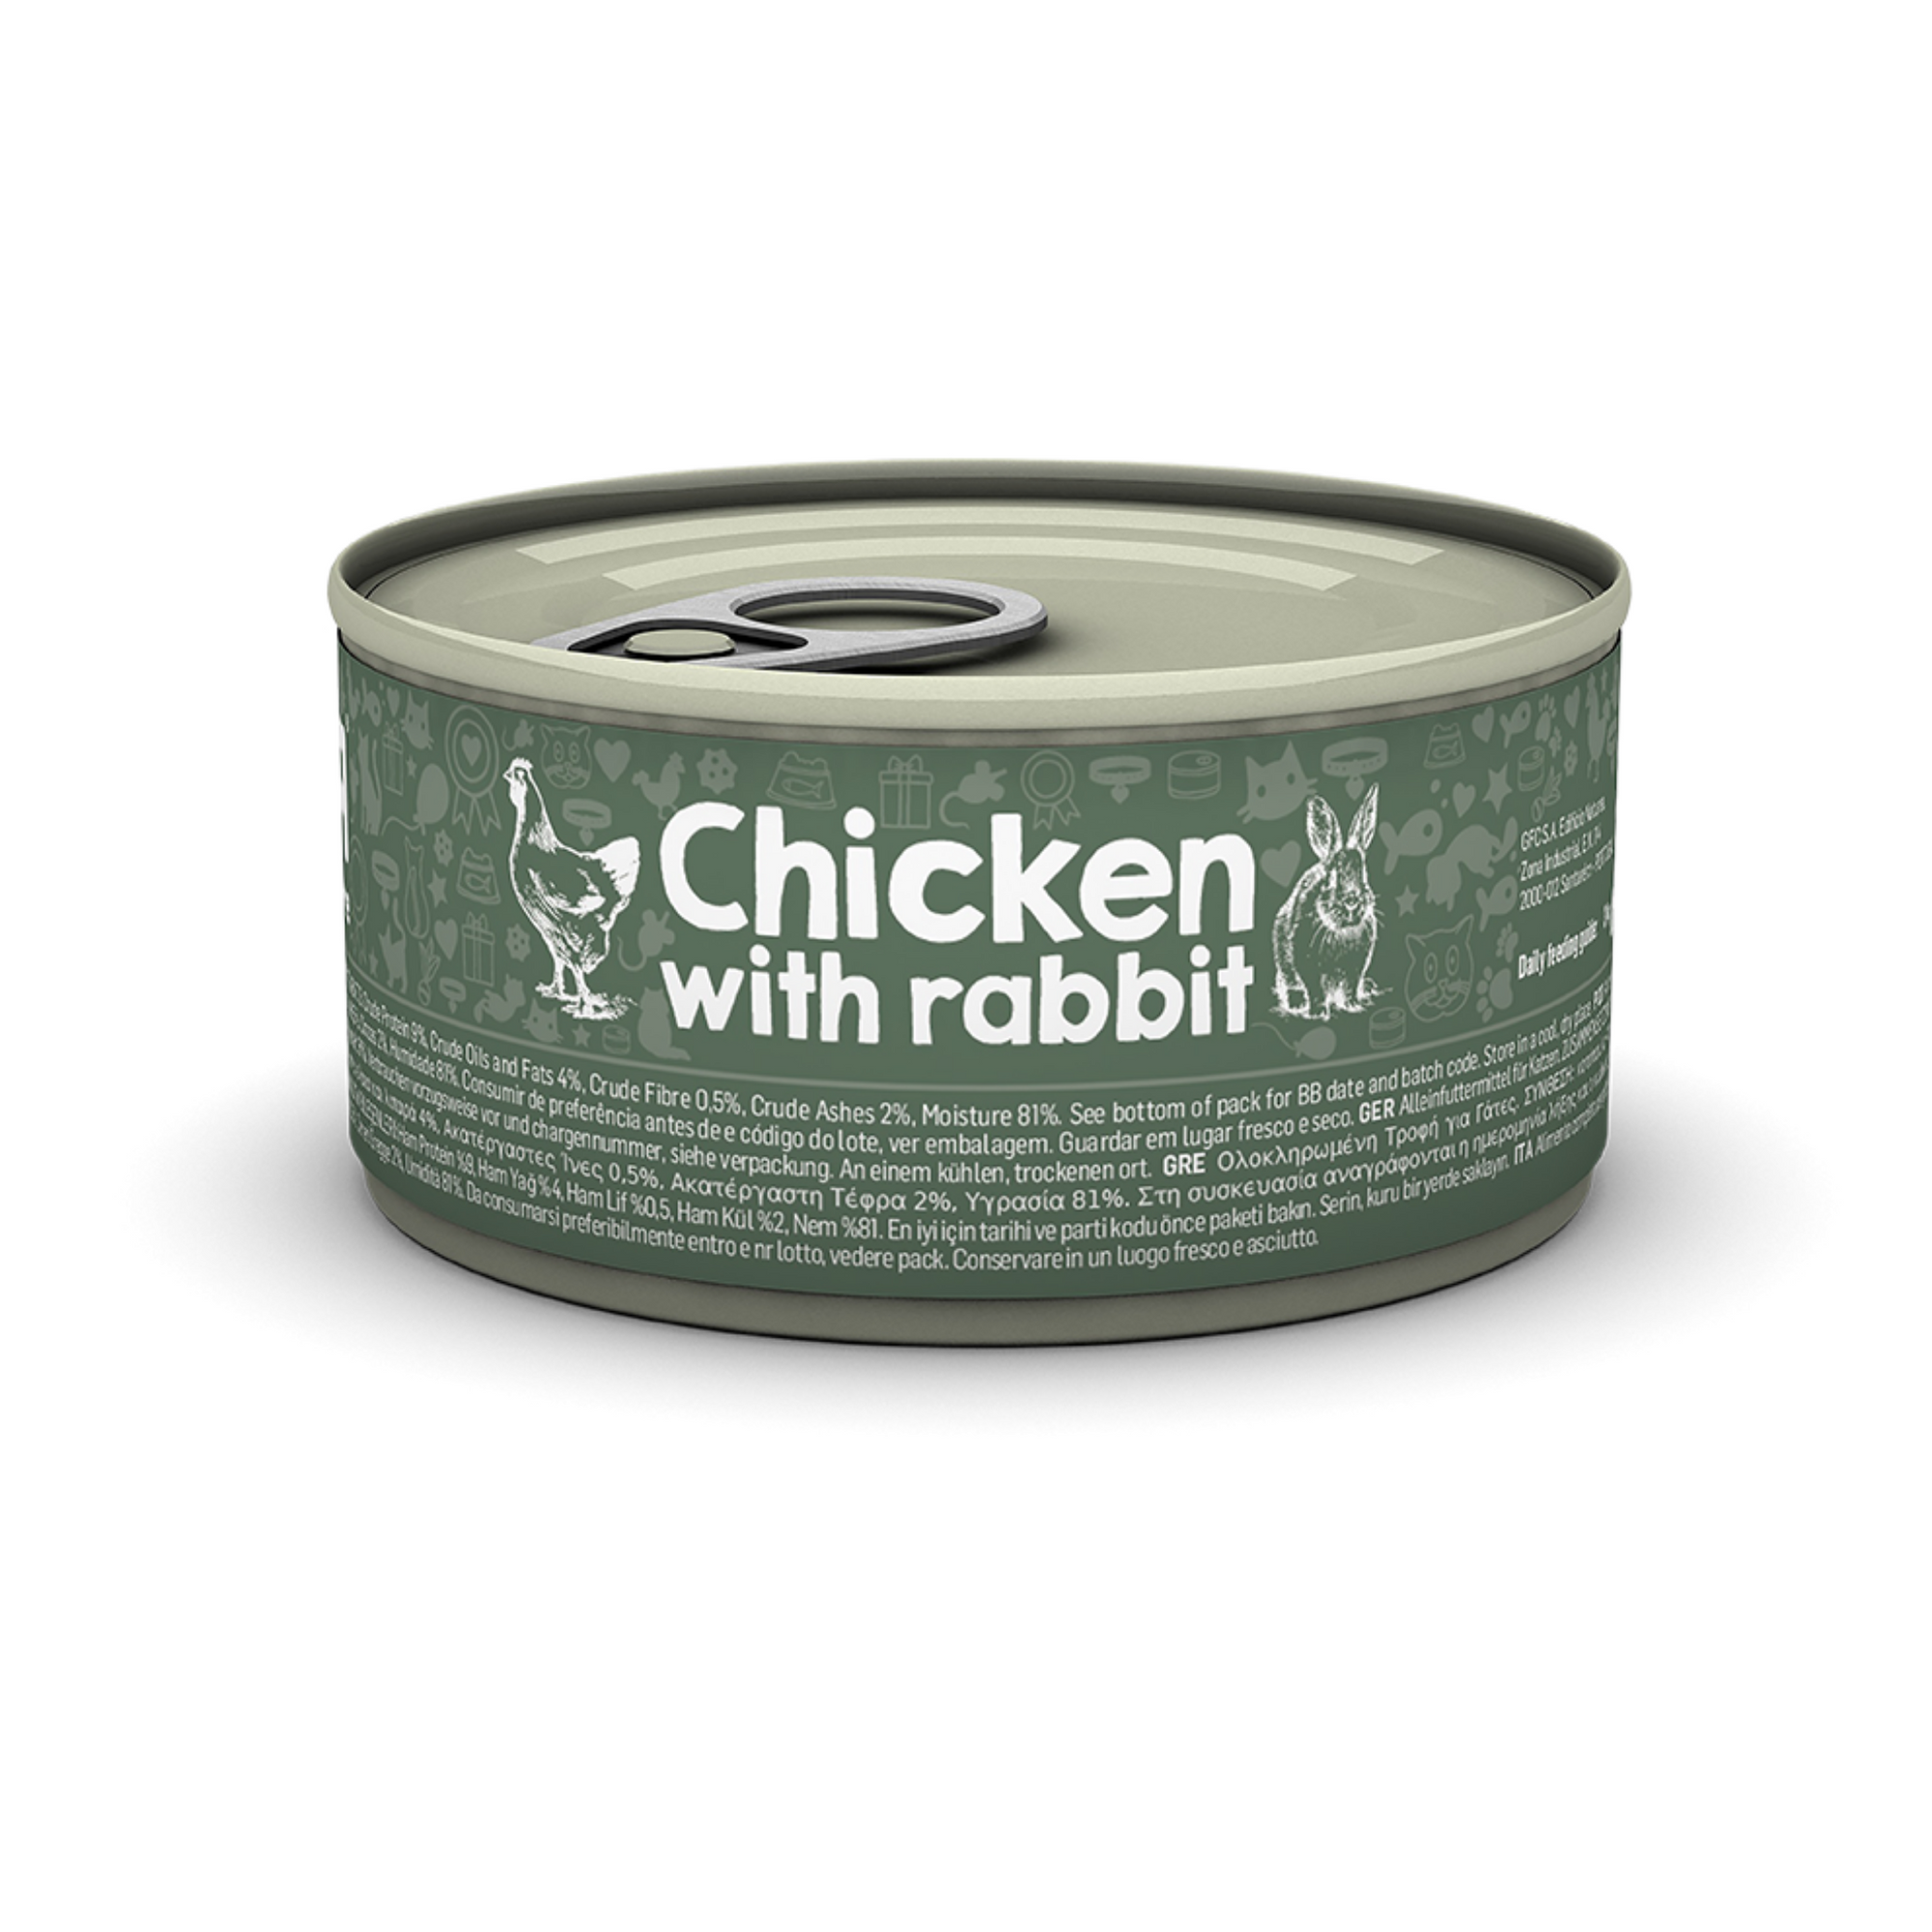 Canned chicken and rabbit meat for cats and kittens